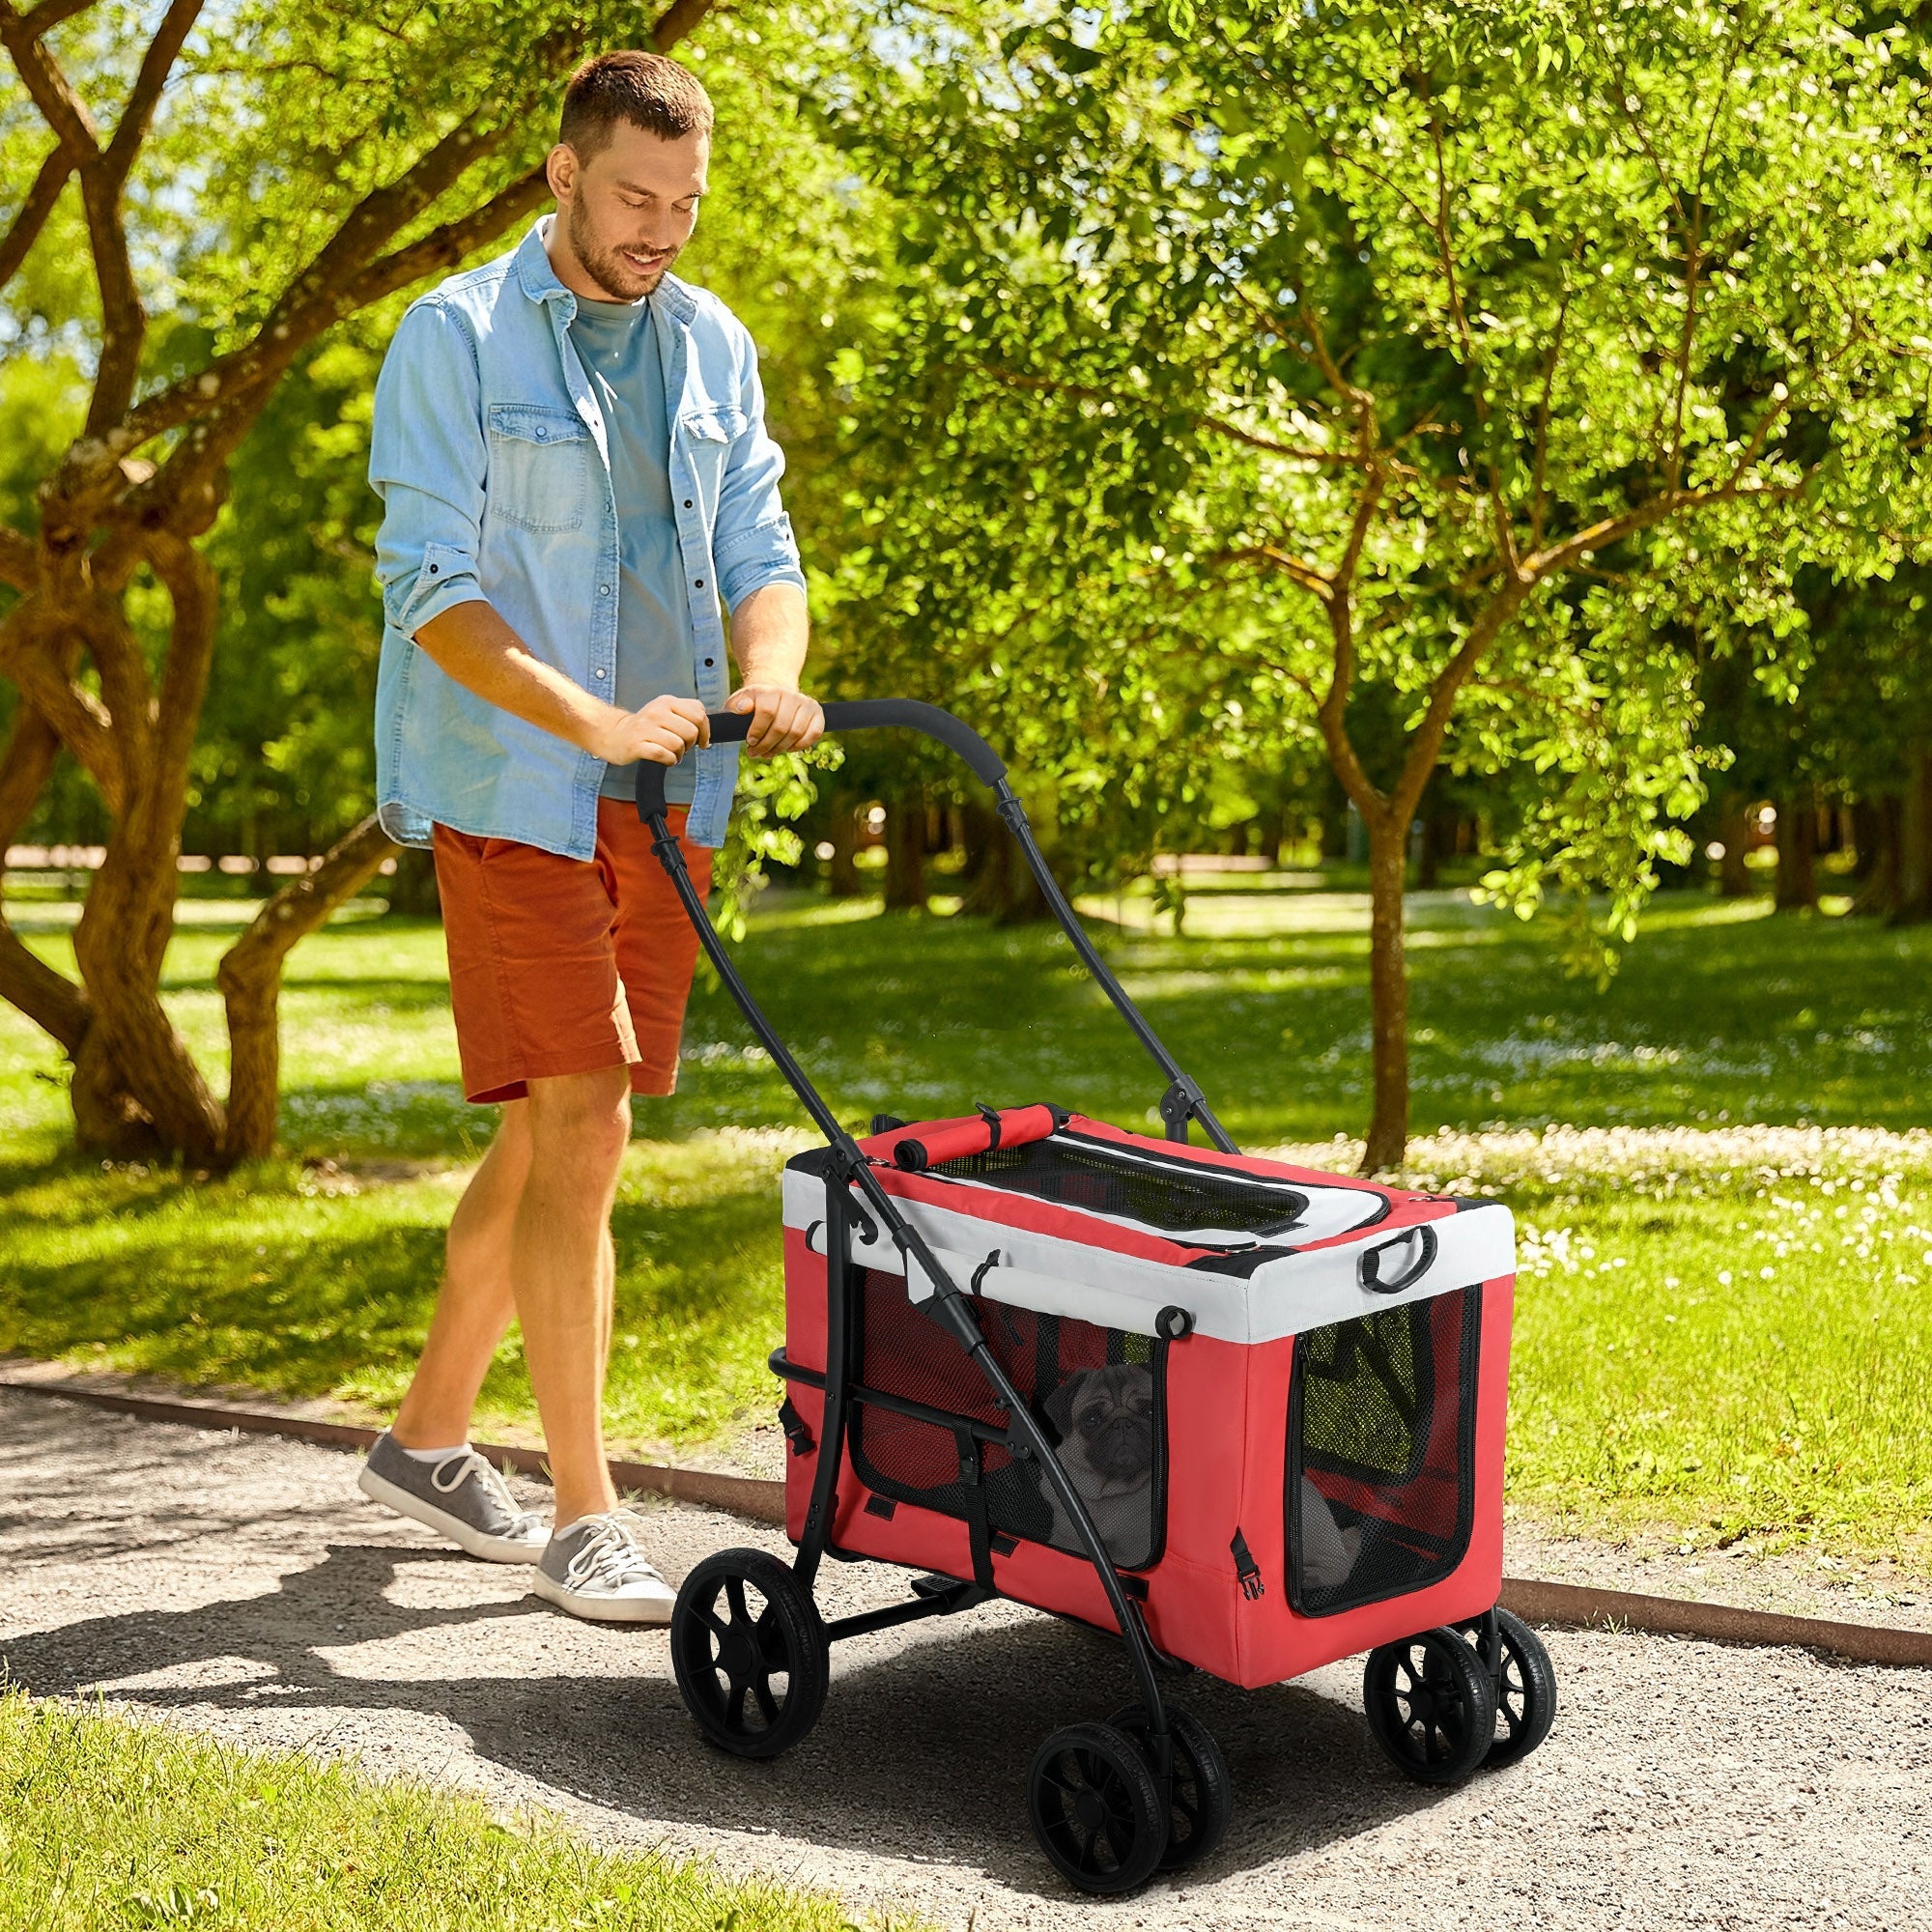 Foldable Dog Stroller, Pet Travel Crate, with Detachable Carrier, Soft Padding, for Mini, Small Dogs - Red-1